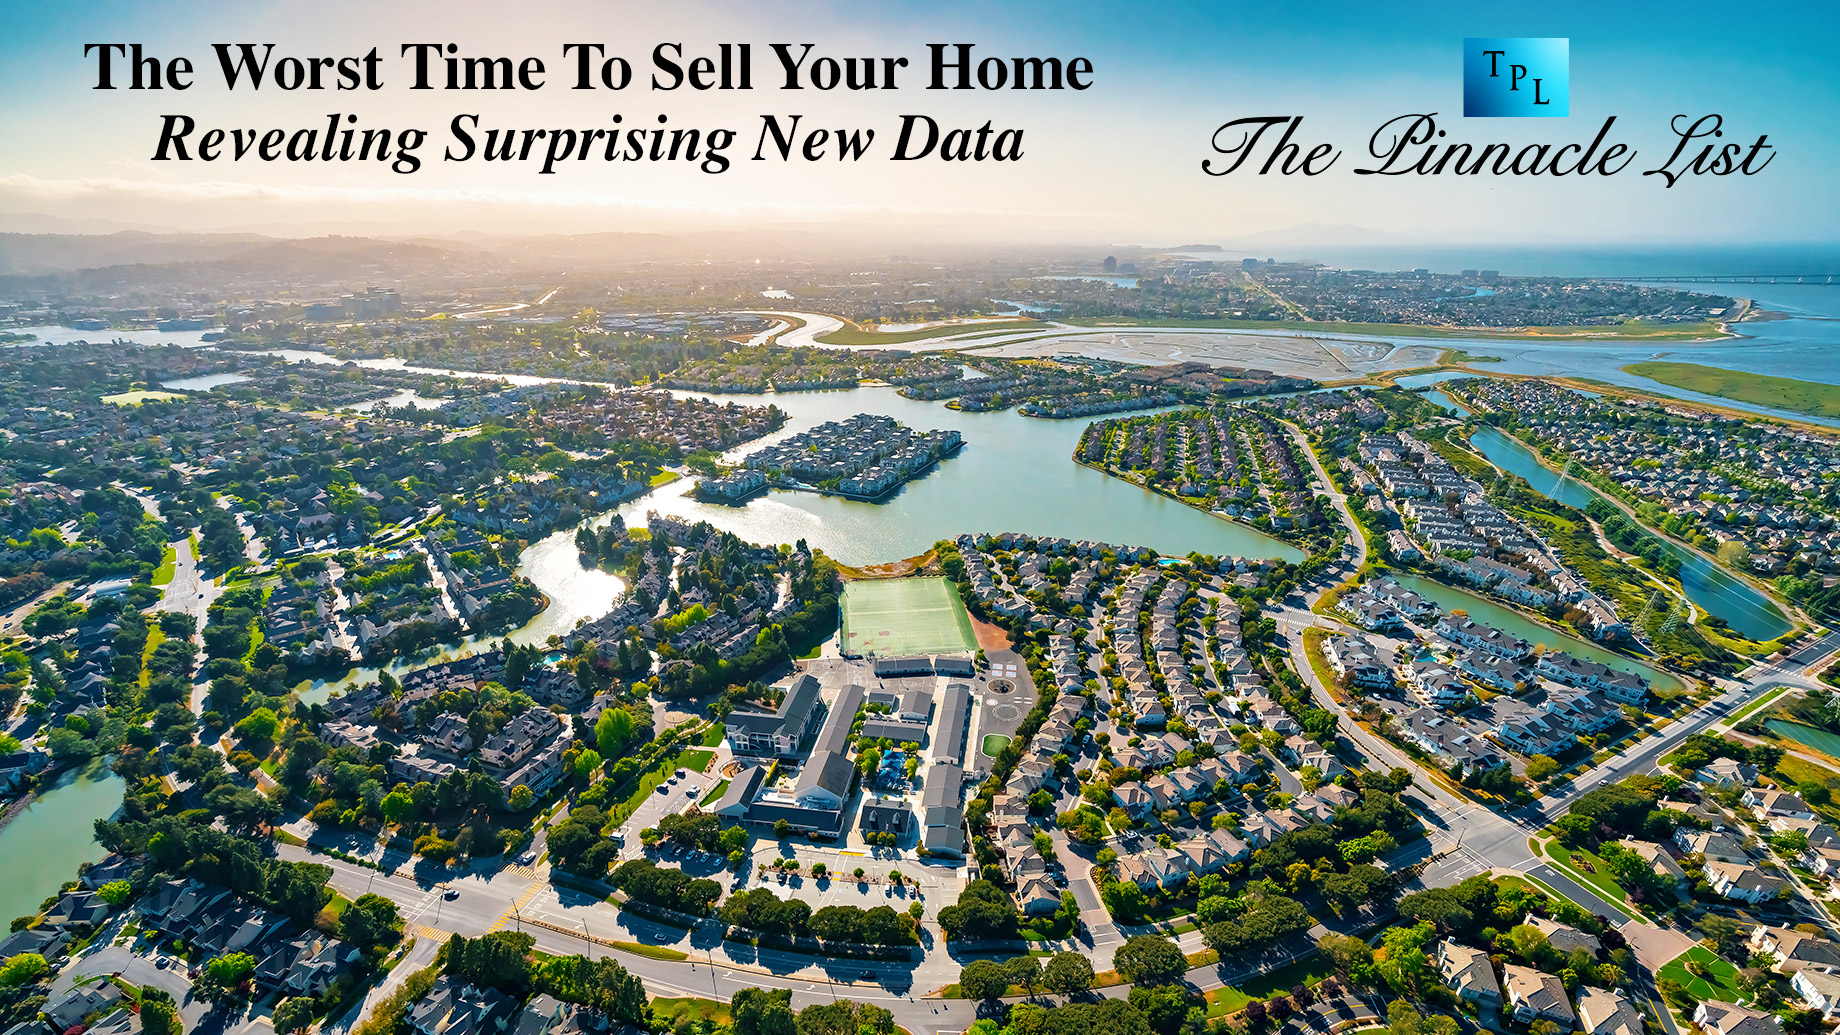 The Worst Time To Sell Your Home: Revealing Surprising New Data